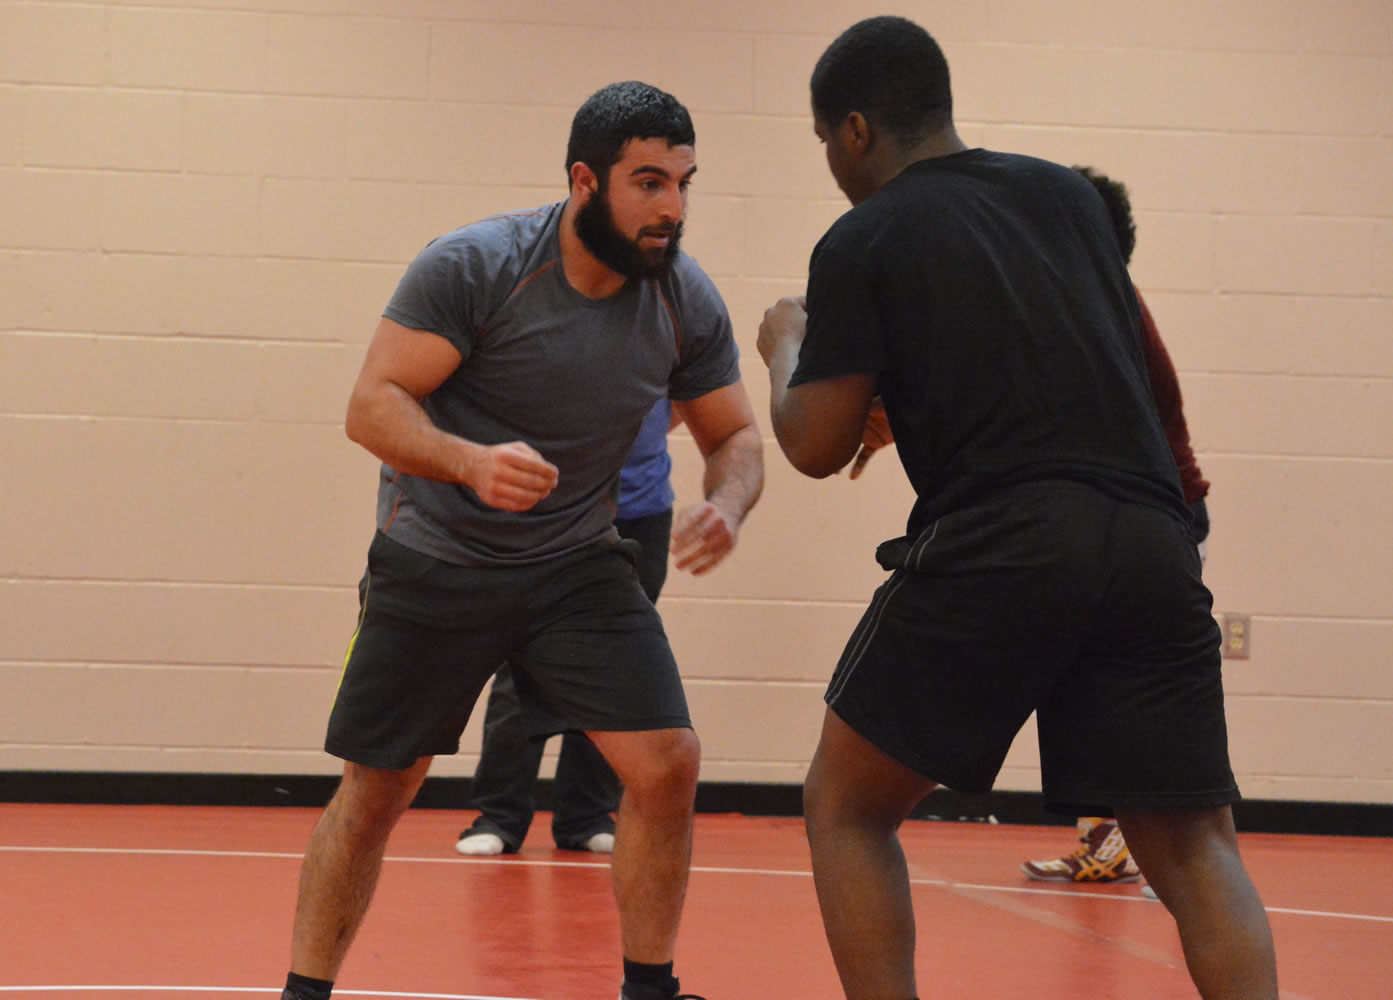 Fort Vancouver High School wrestling coach Saleh Batroukh, left, does a drill with one of his wrestlers during practice on Wednesday.